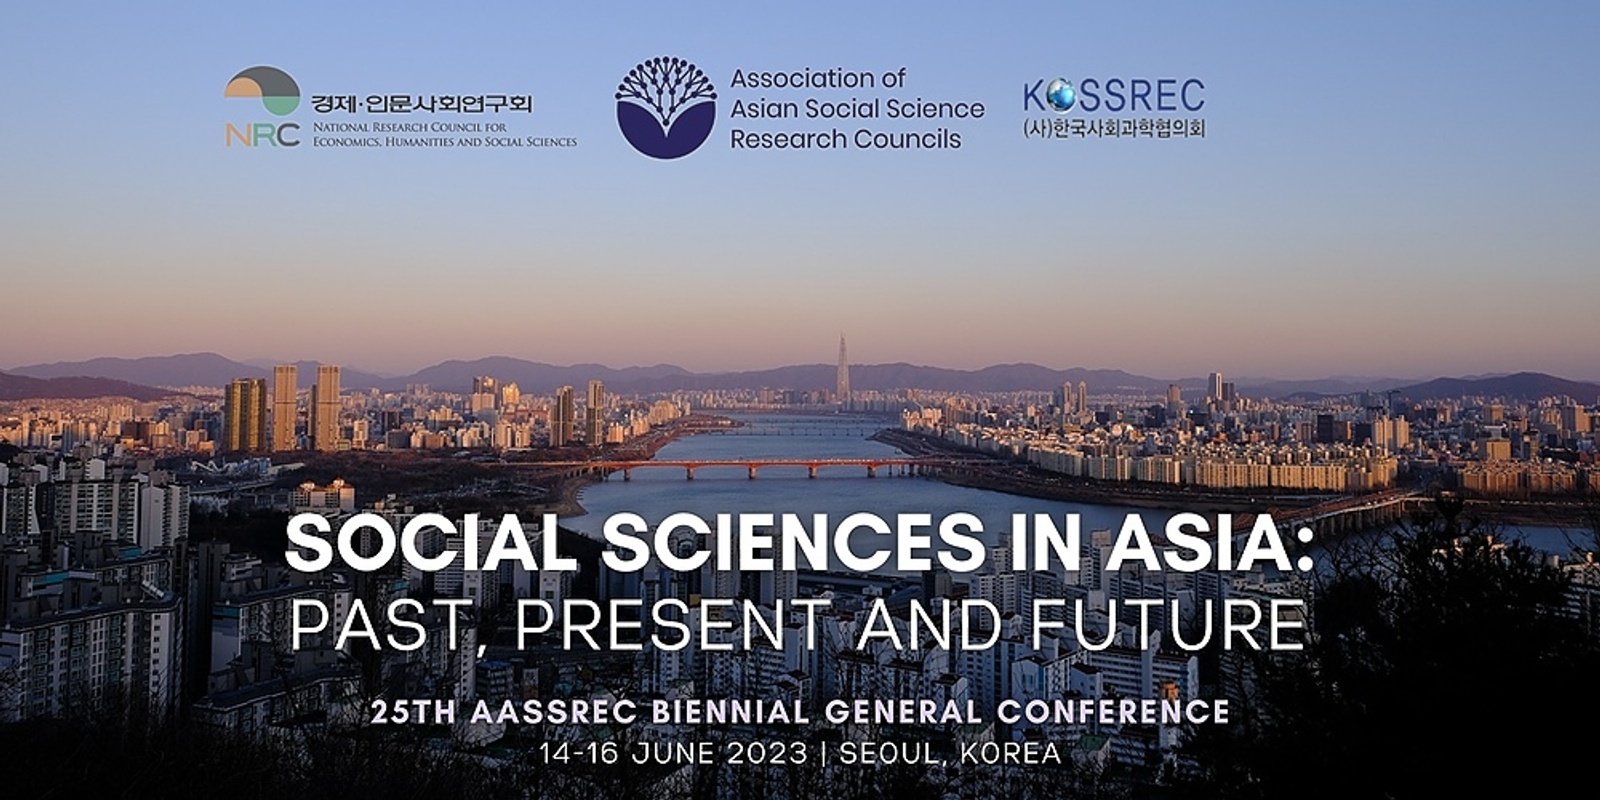 Social Sciences in Asia: Past, Present and Future